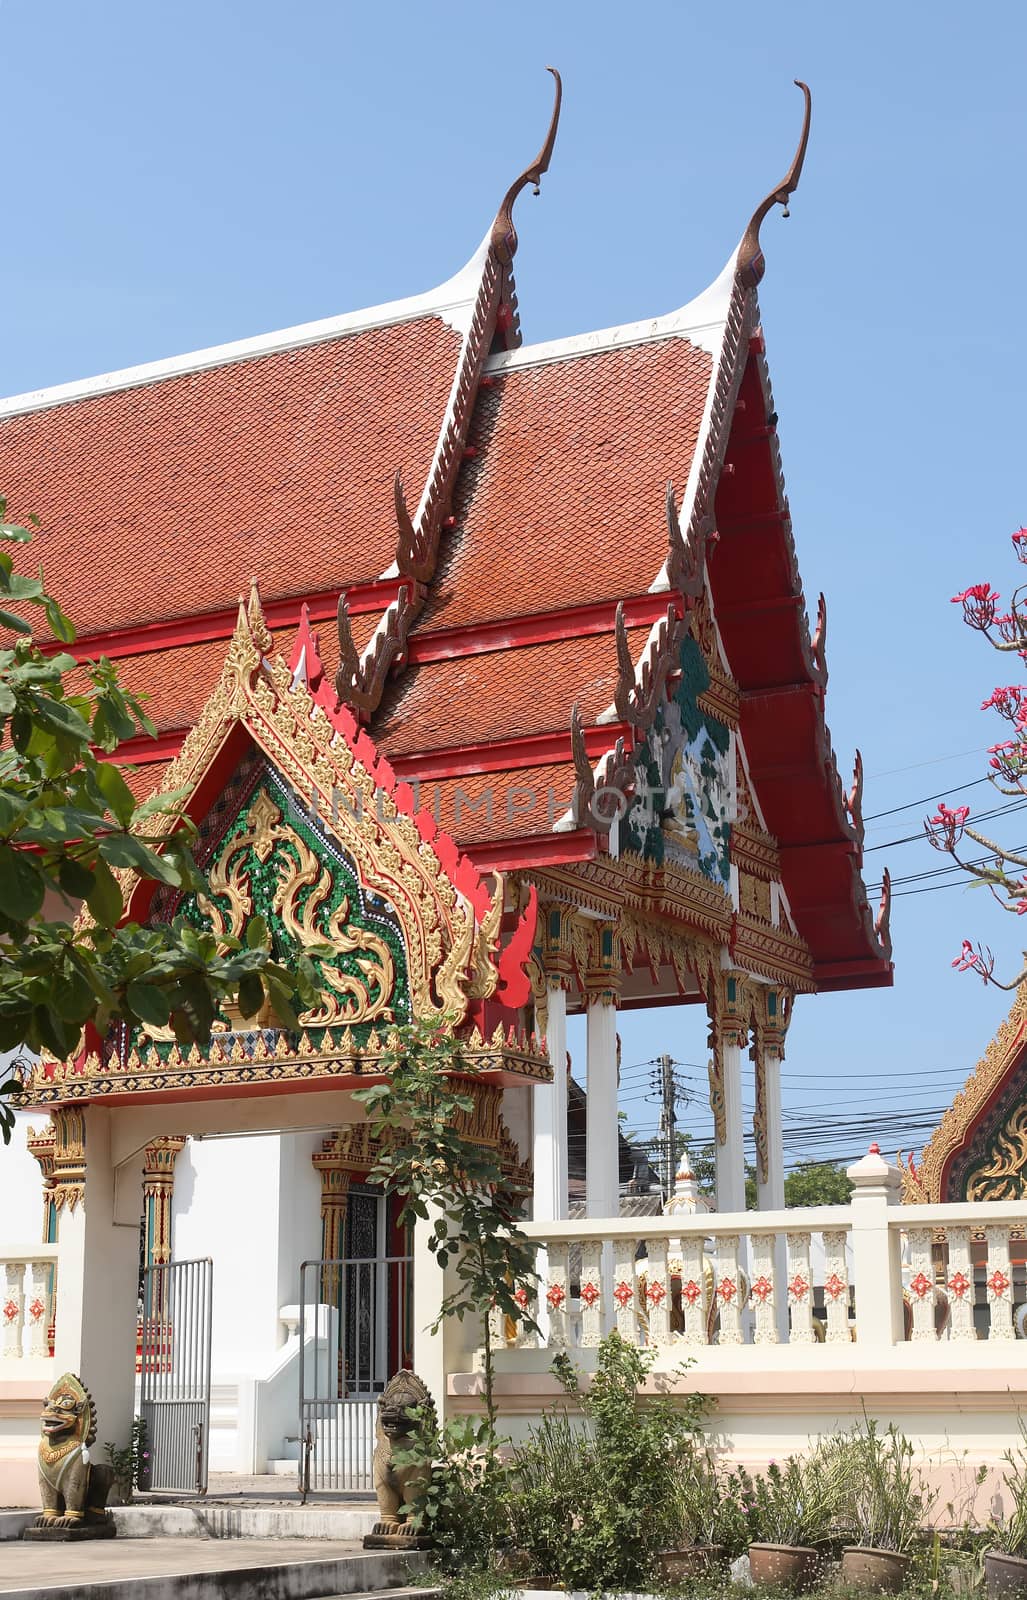 Detail of a Buddhist temple in Bangkok, Thailand